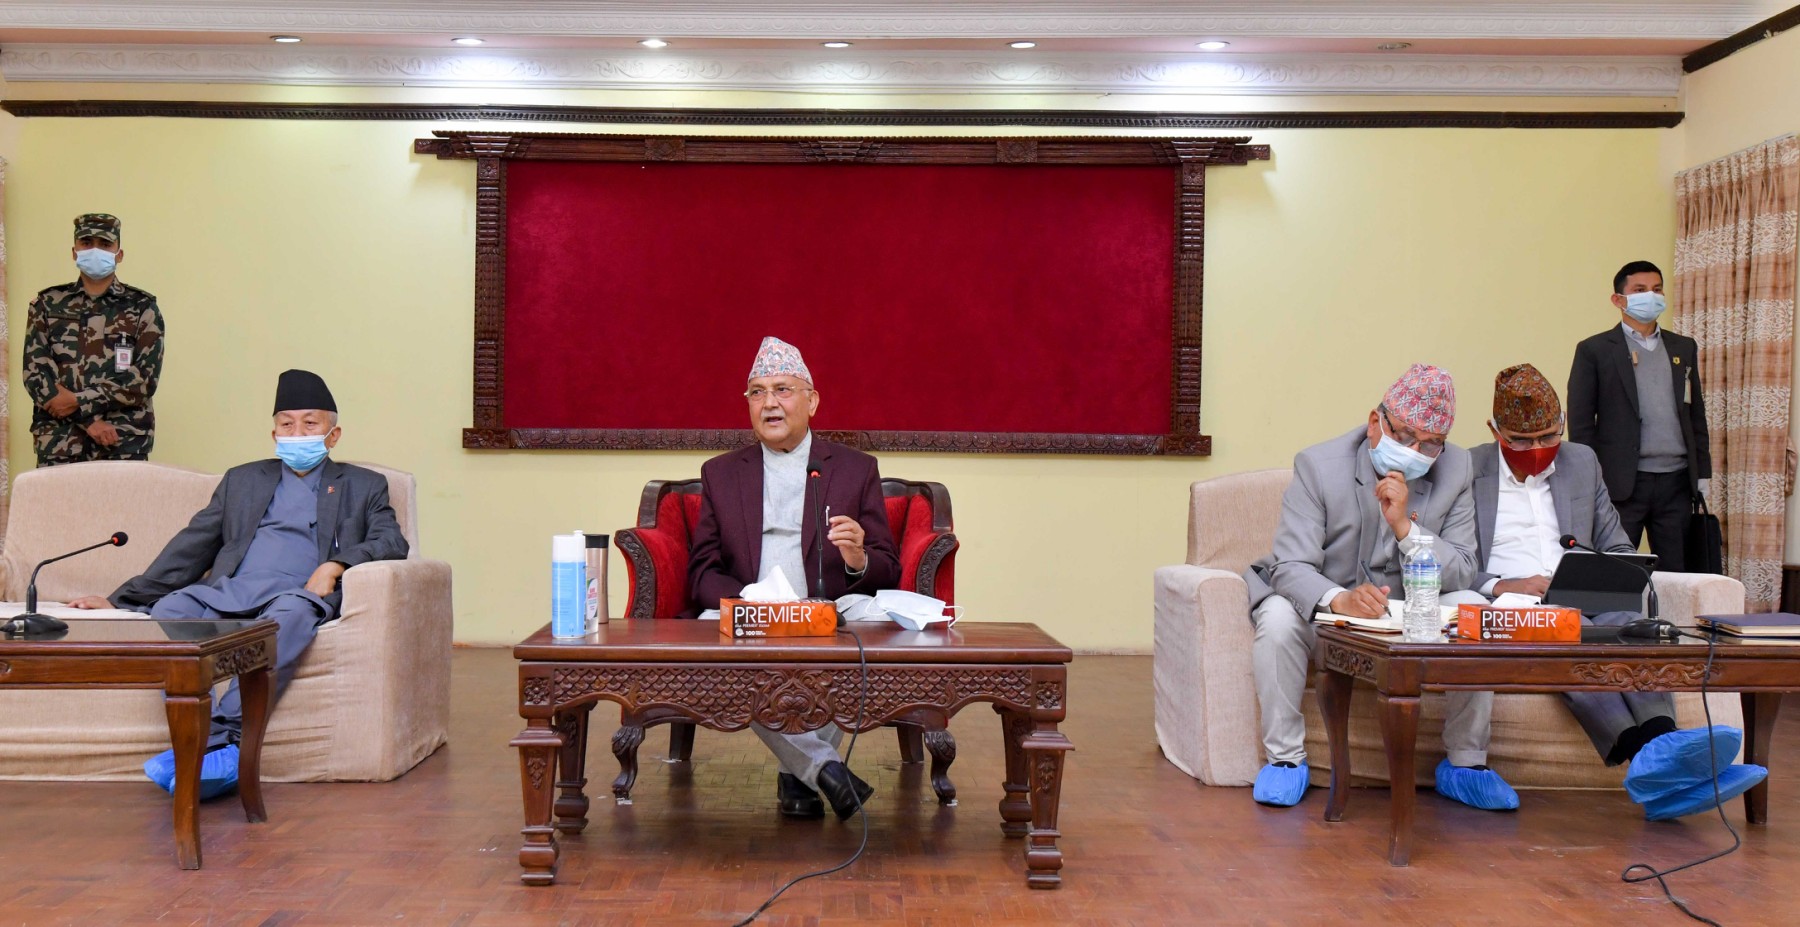 UML central committee meeting today, will action be taken against those who do not follow the instructions